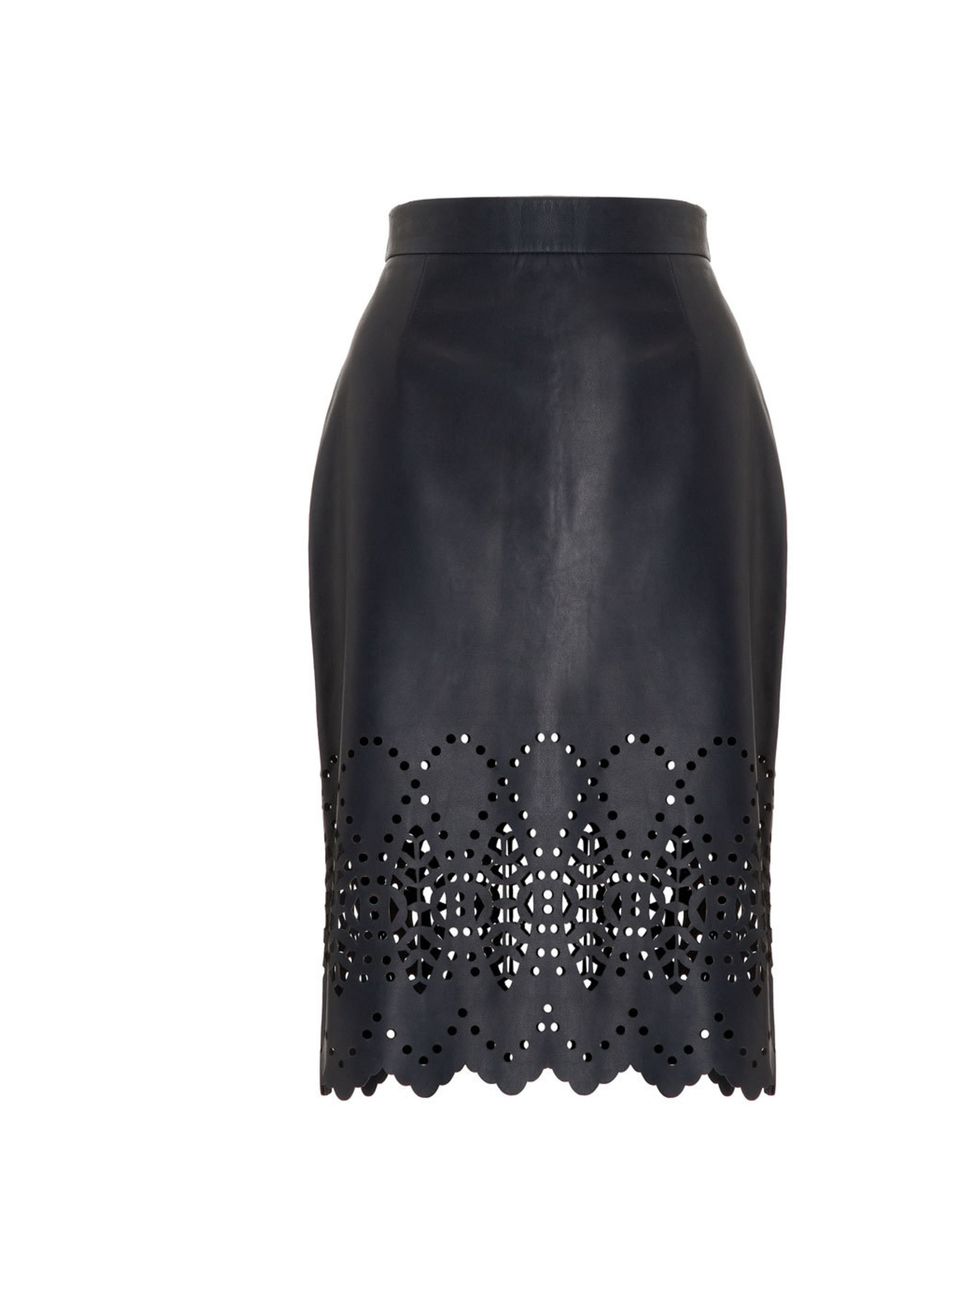 <p>This week Whistles launch their new leather collection. While we adore their scallop edge T-shirt and matching skirt, this impactful laser cut skirt is our stand-out favourite Whistles navy leather skirt, £250, for stockists call 0845 899 1222</p>